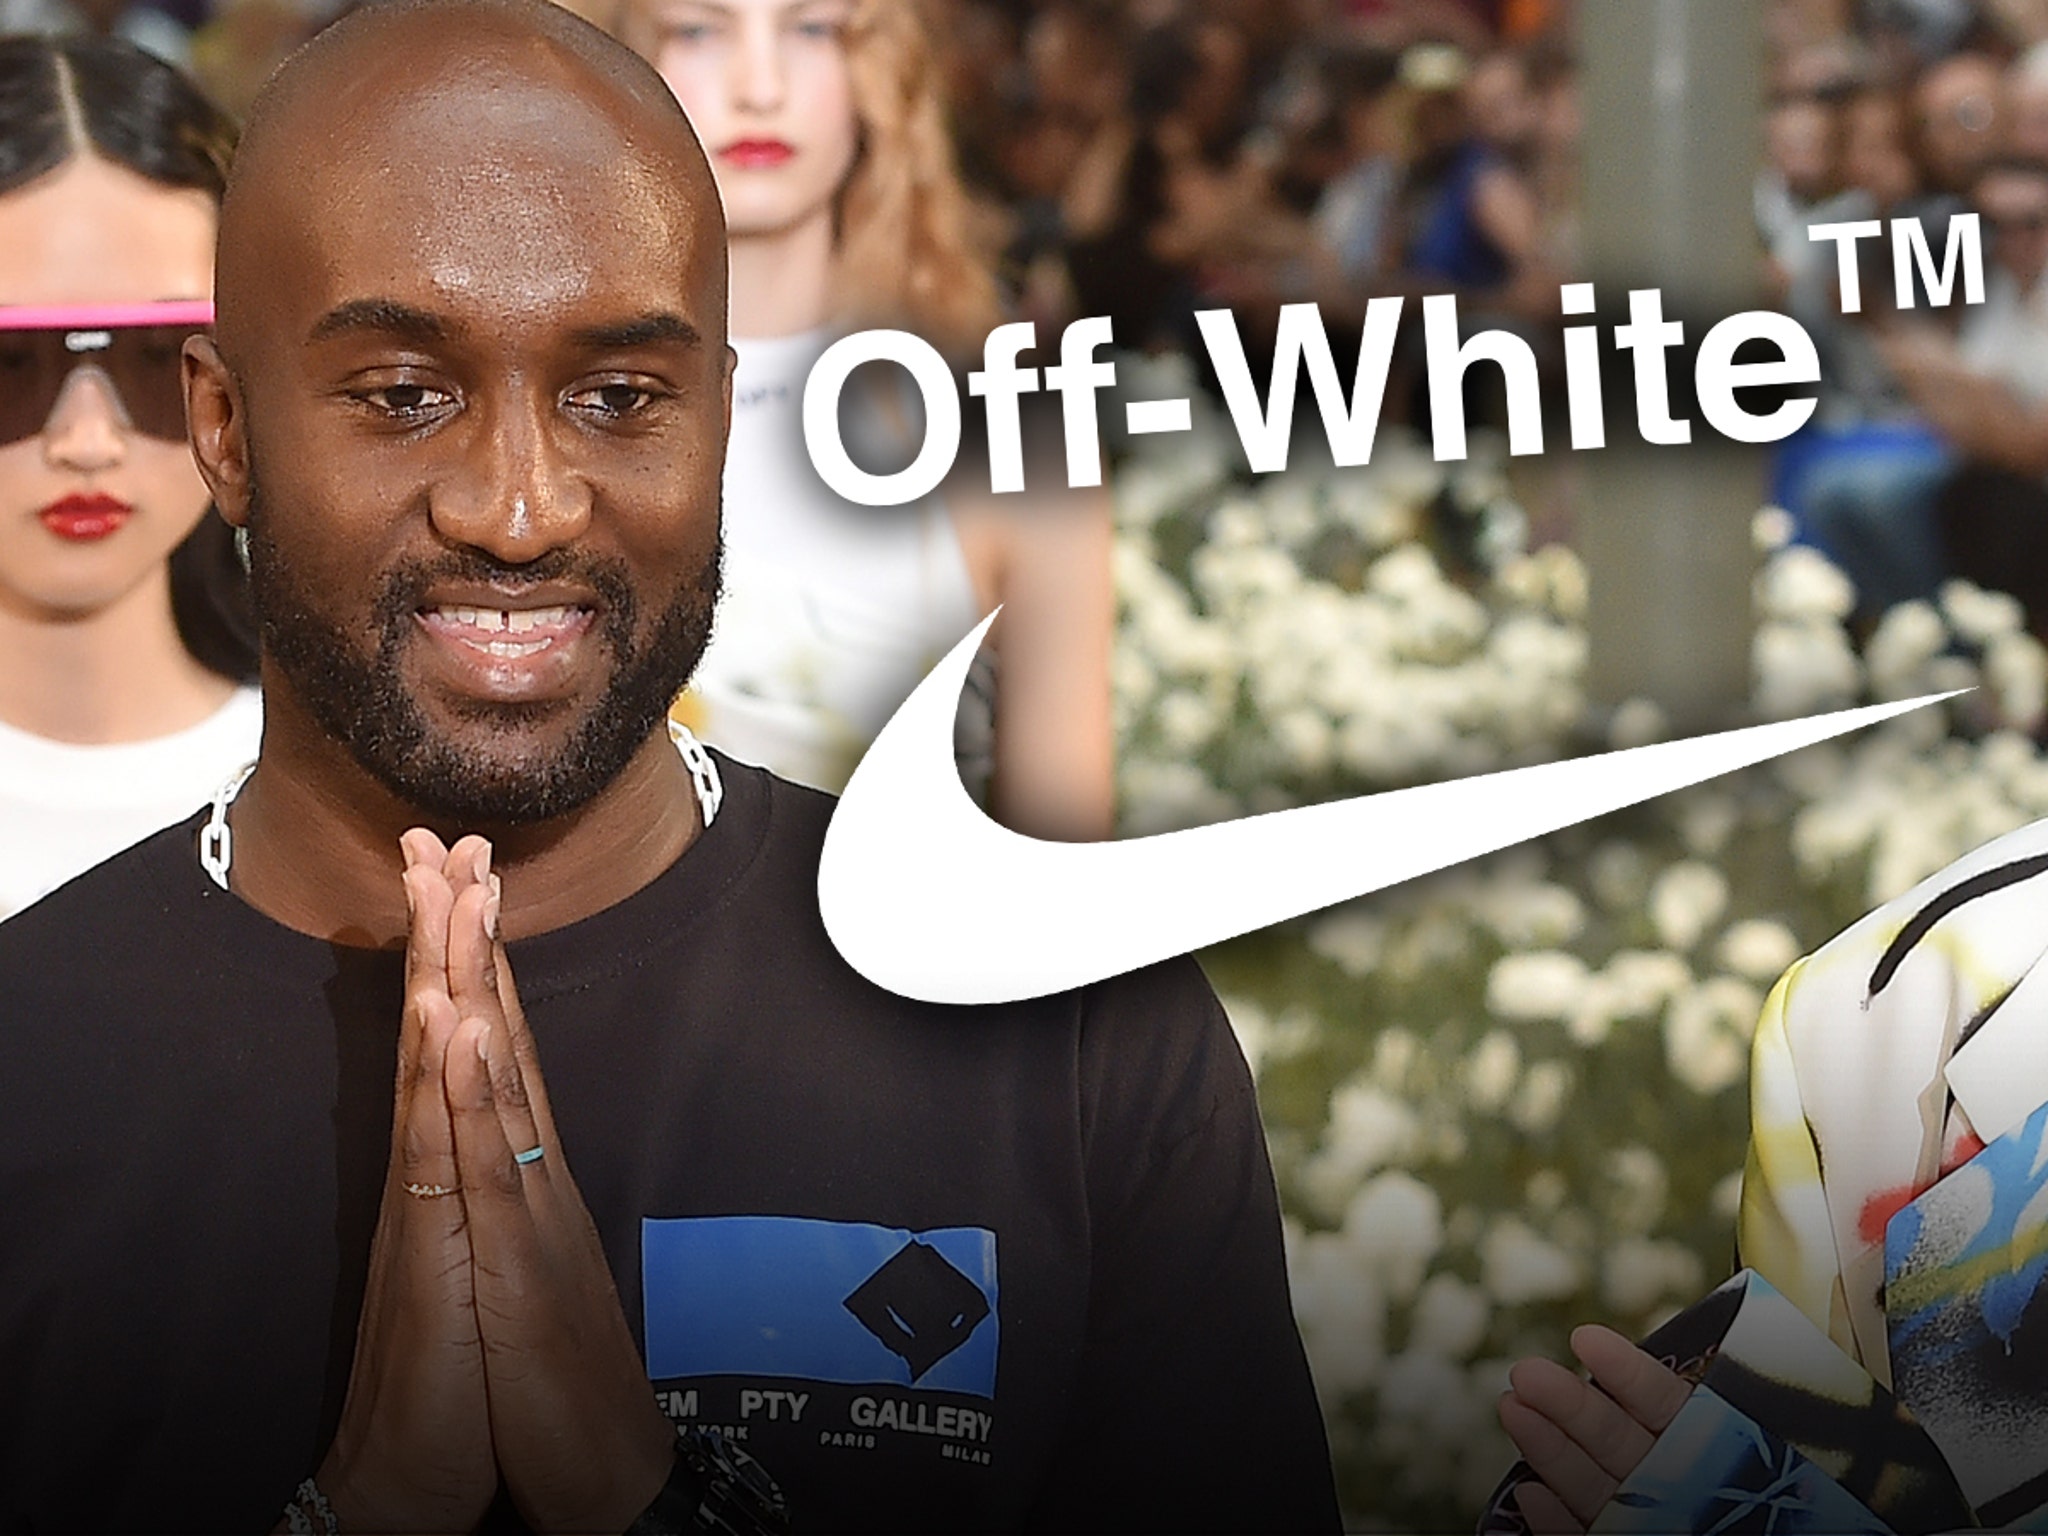 Virgil Abloh's Nike x Off-White Air Force 1 sneaker is reportedly coming  soon